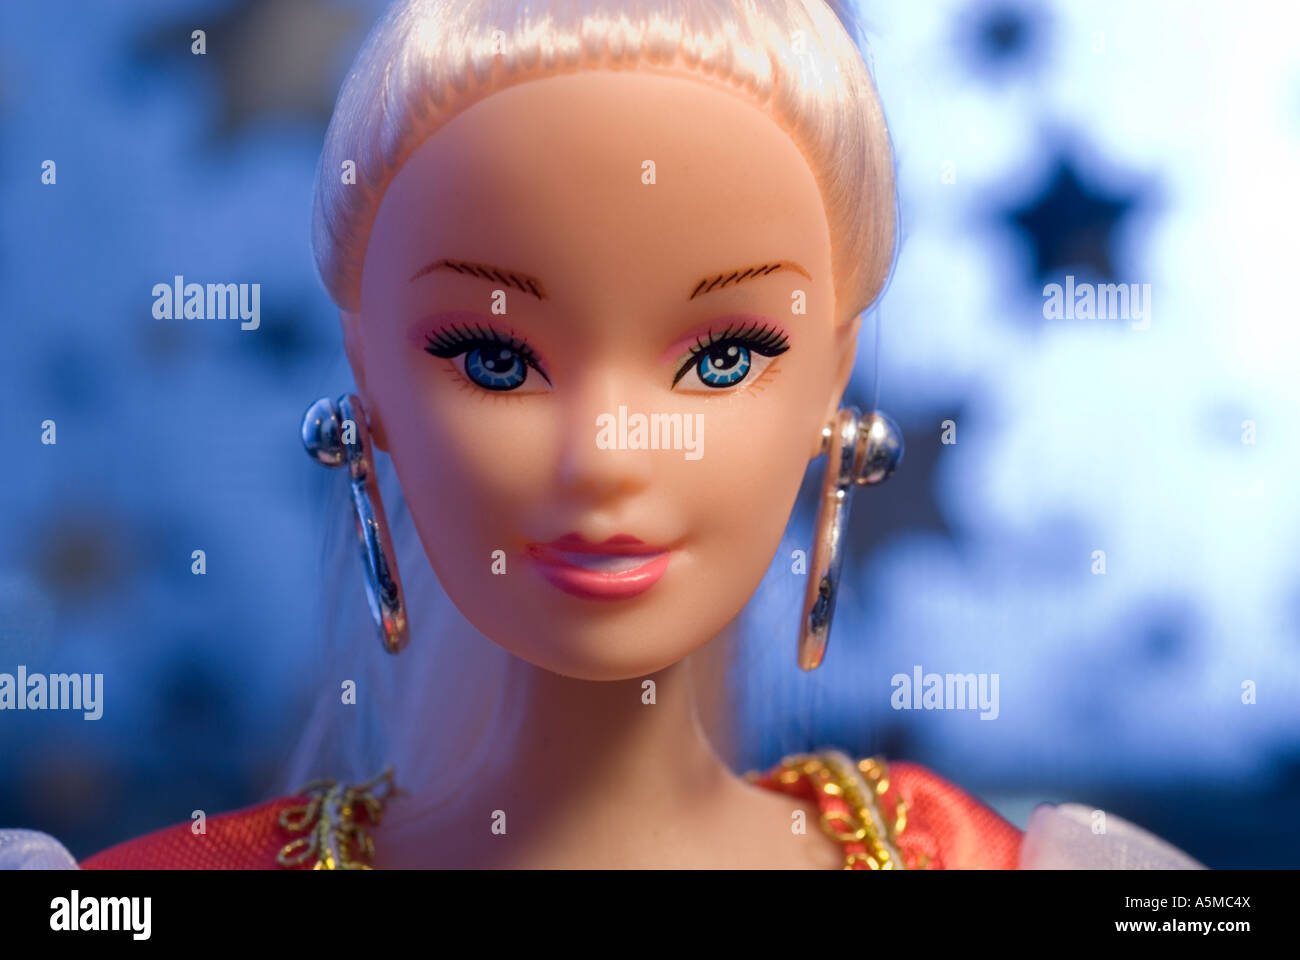 dolls face in front of starry background Stock Photo